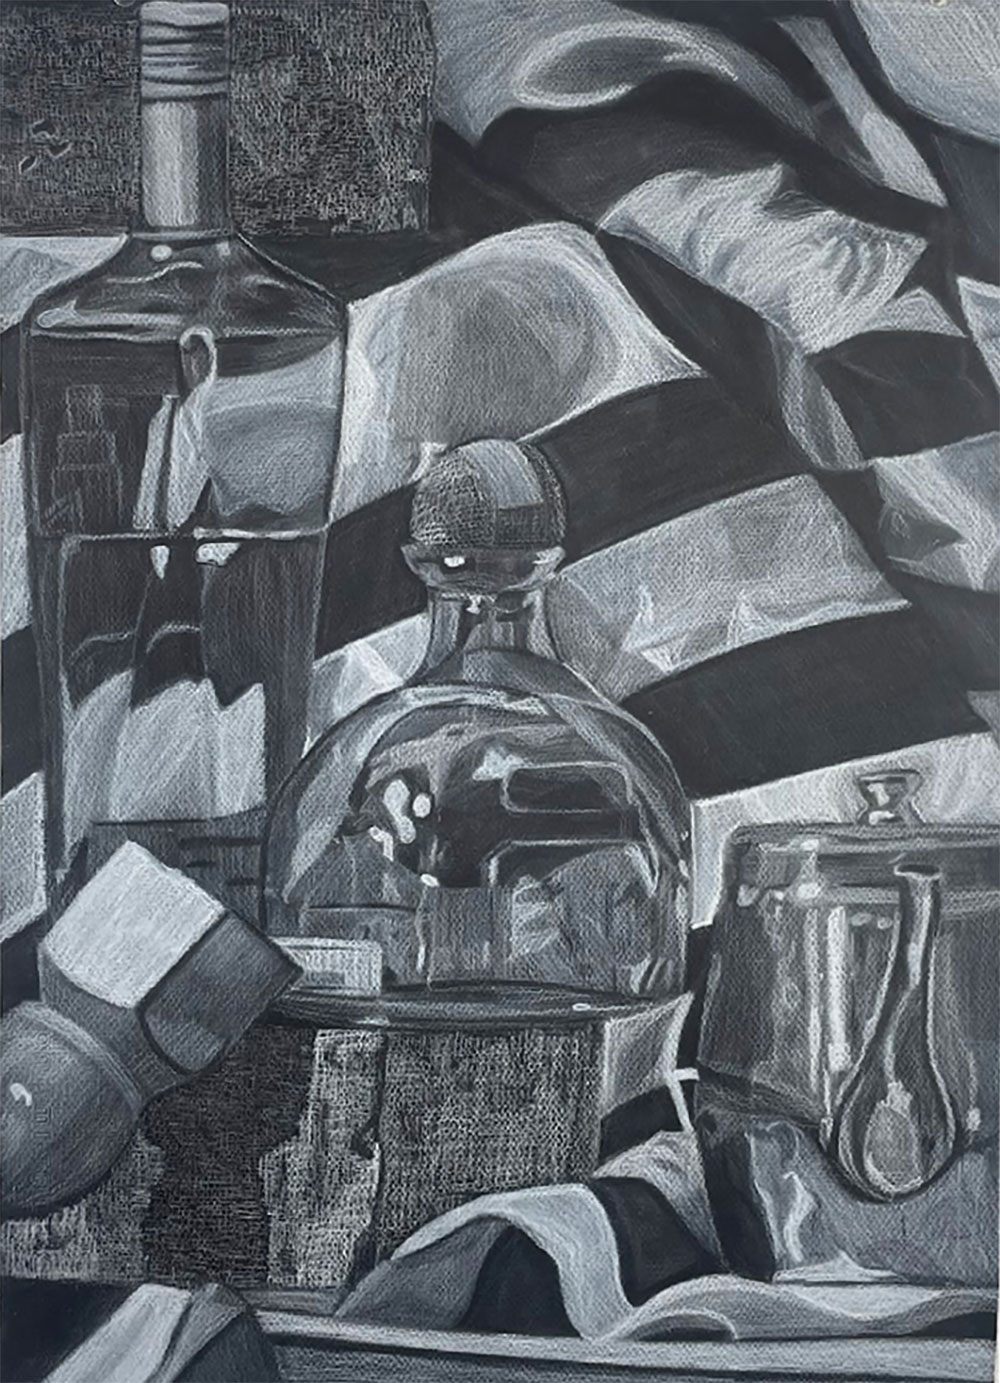 White charcoal drawing of a still life includes: a tequila bottle, a glass, and the bottom foot of a table.